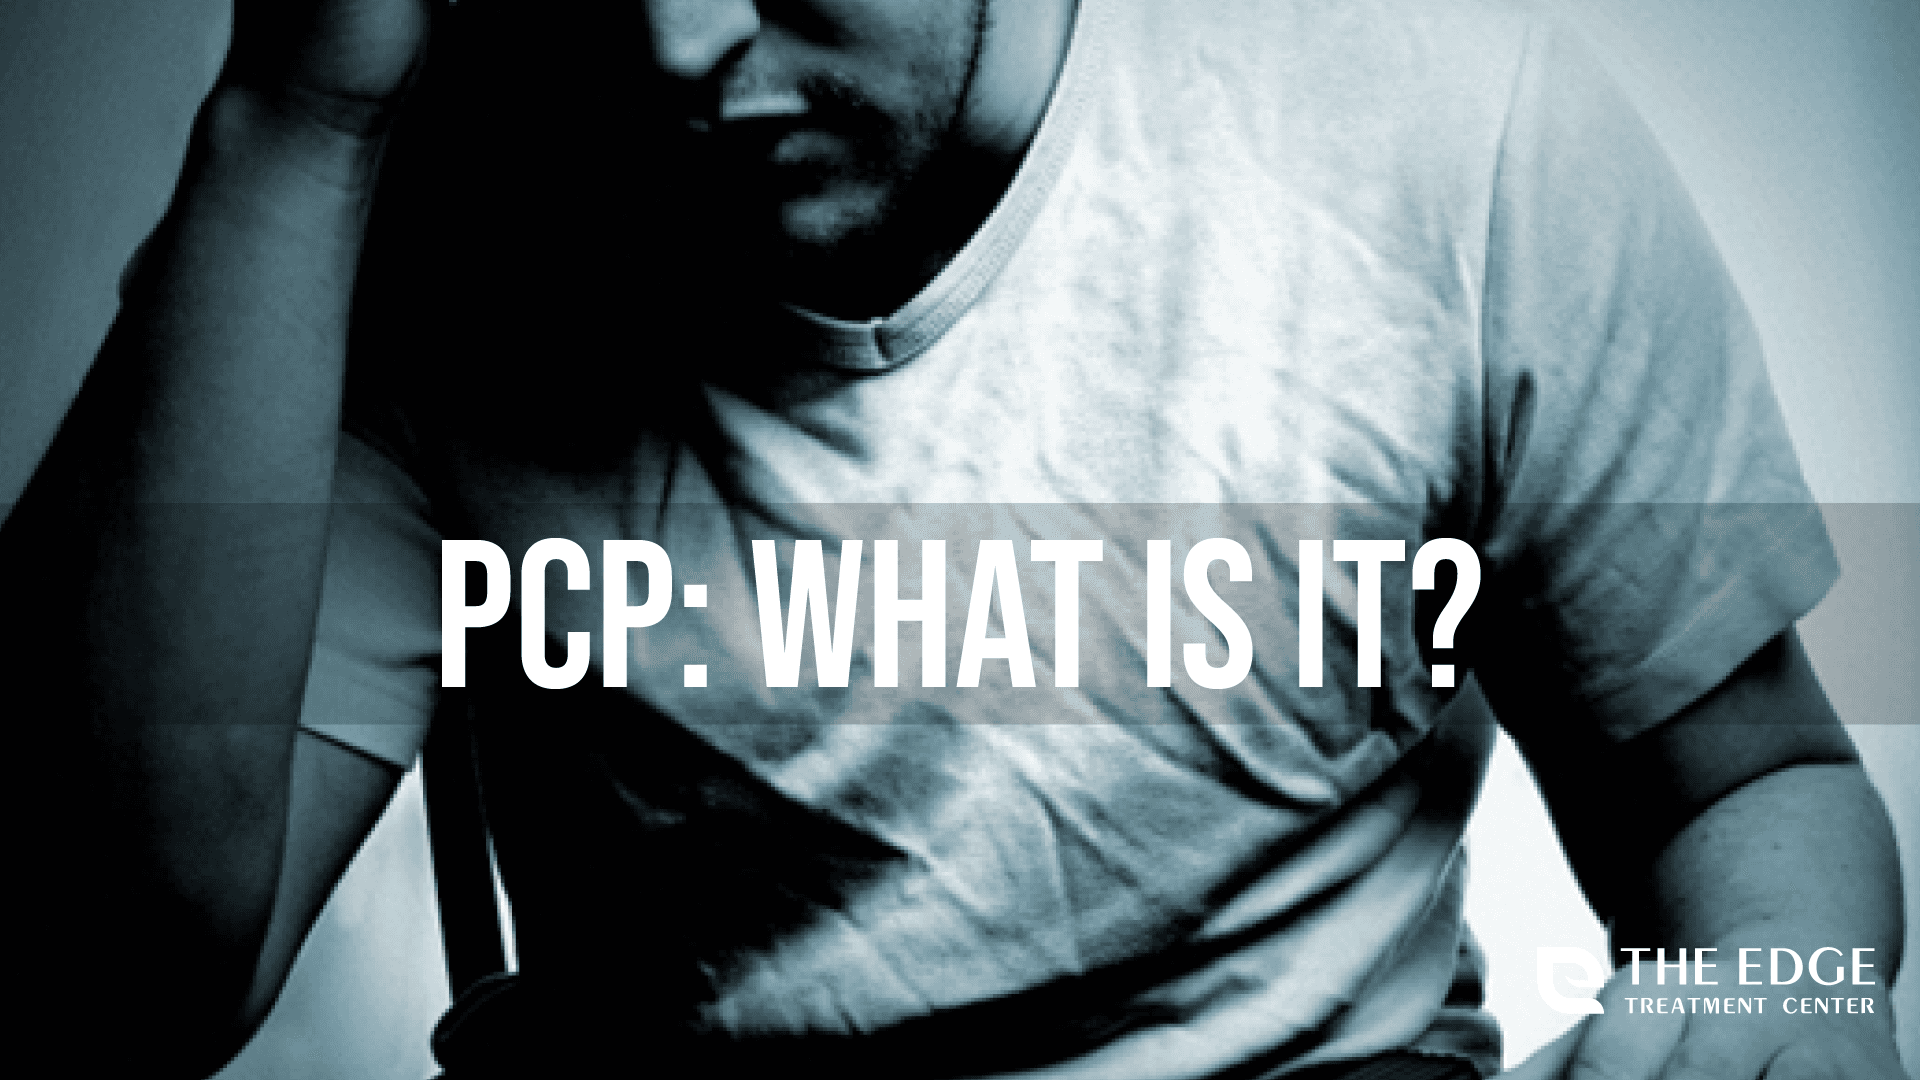 PCP Abuse: Usage, Side-Effects, Risks, and Addiction Treatment